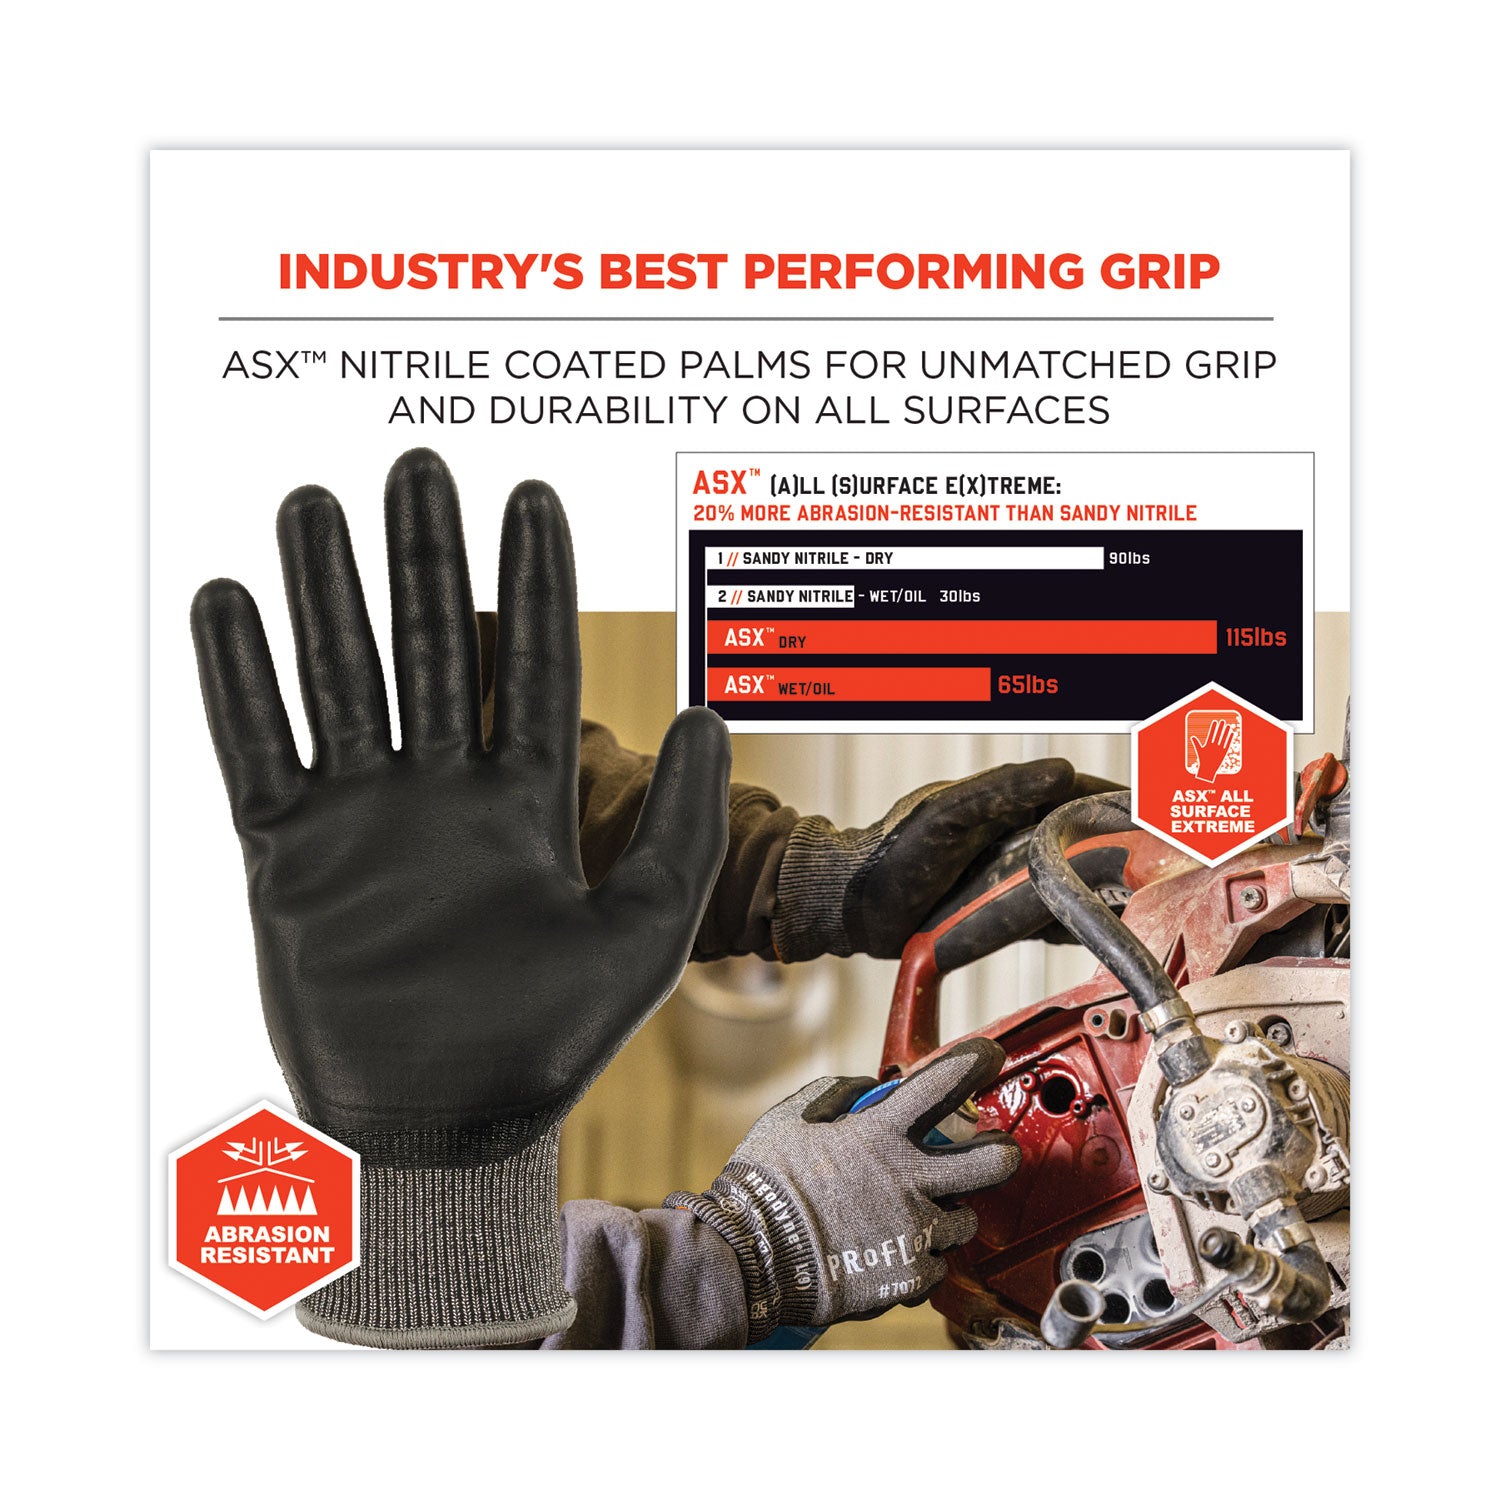 proflex-7072-ansi-a7-nitrile-coated-cr-gloves-gray-large-pair-ships-in-1-3-business-days_ego10314 - 4